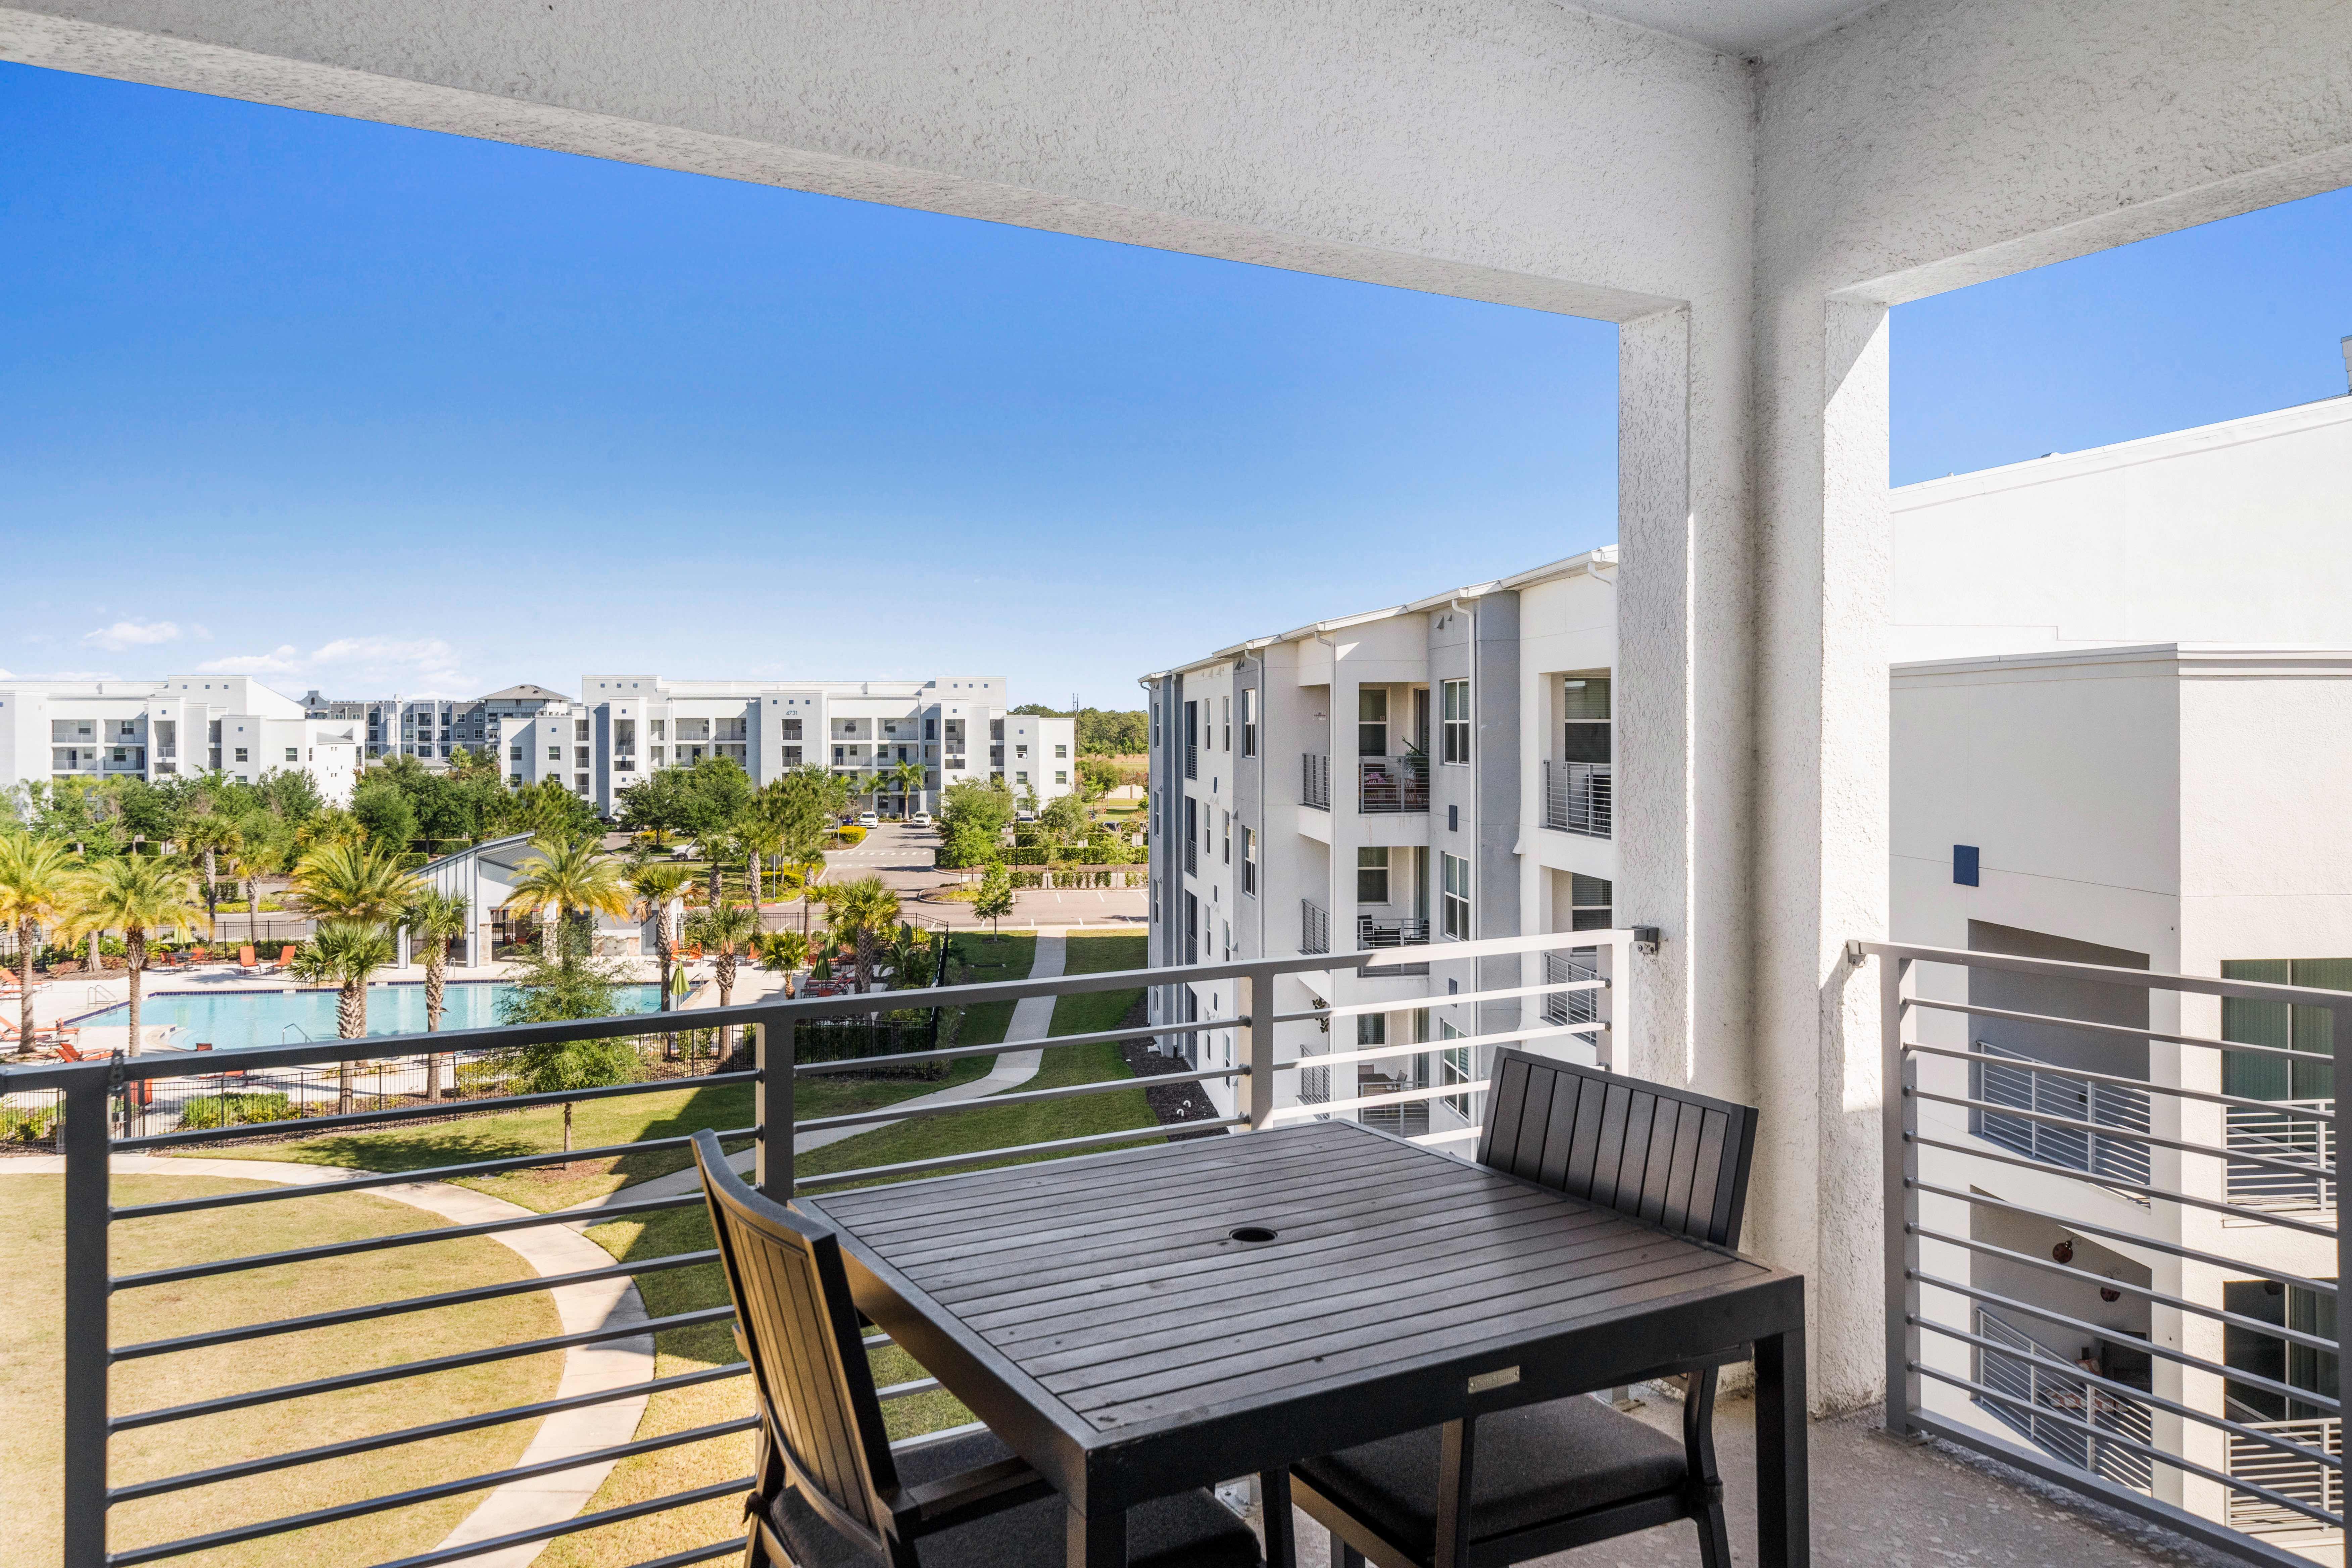 Imposing Private Balcony of the Condo in Kissimmee - Mesmerizing Pool and surrounding views from the balcony - Beautiful 2 Persons Dinning for having coffee in the refreshing atmosphere - Fabulous sitting space